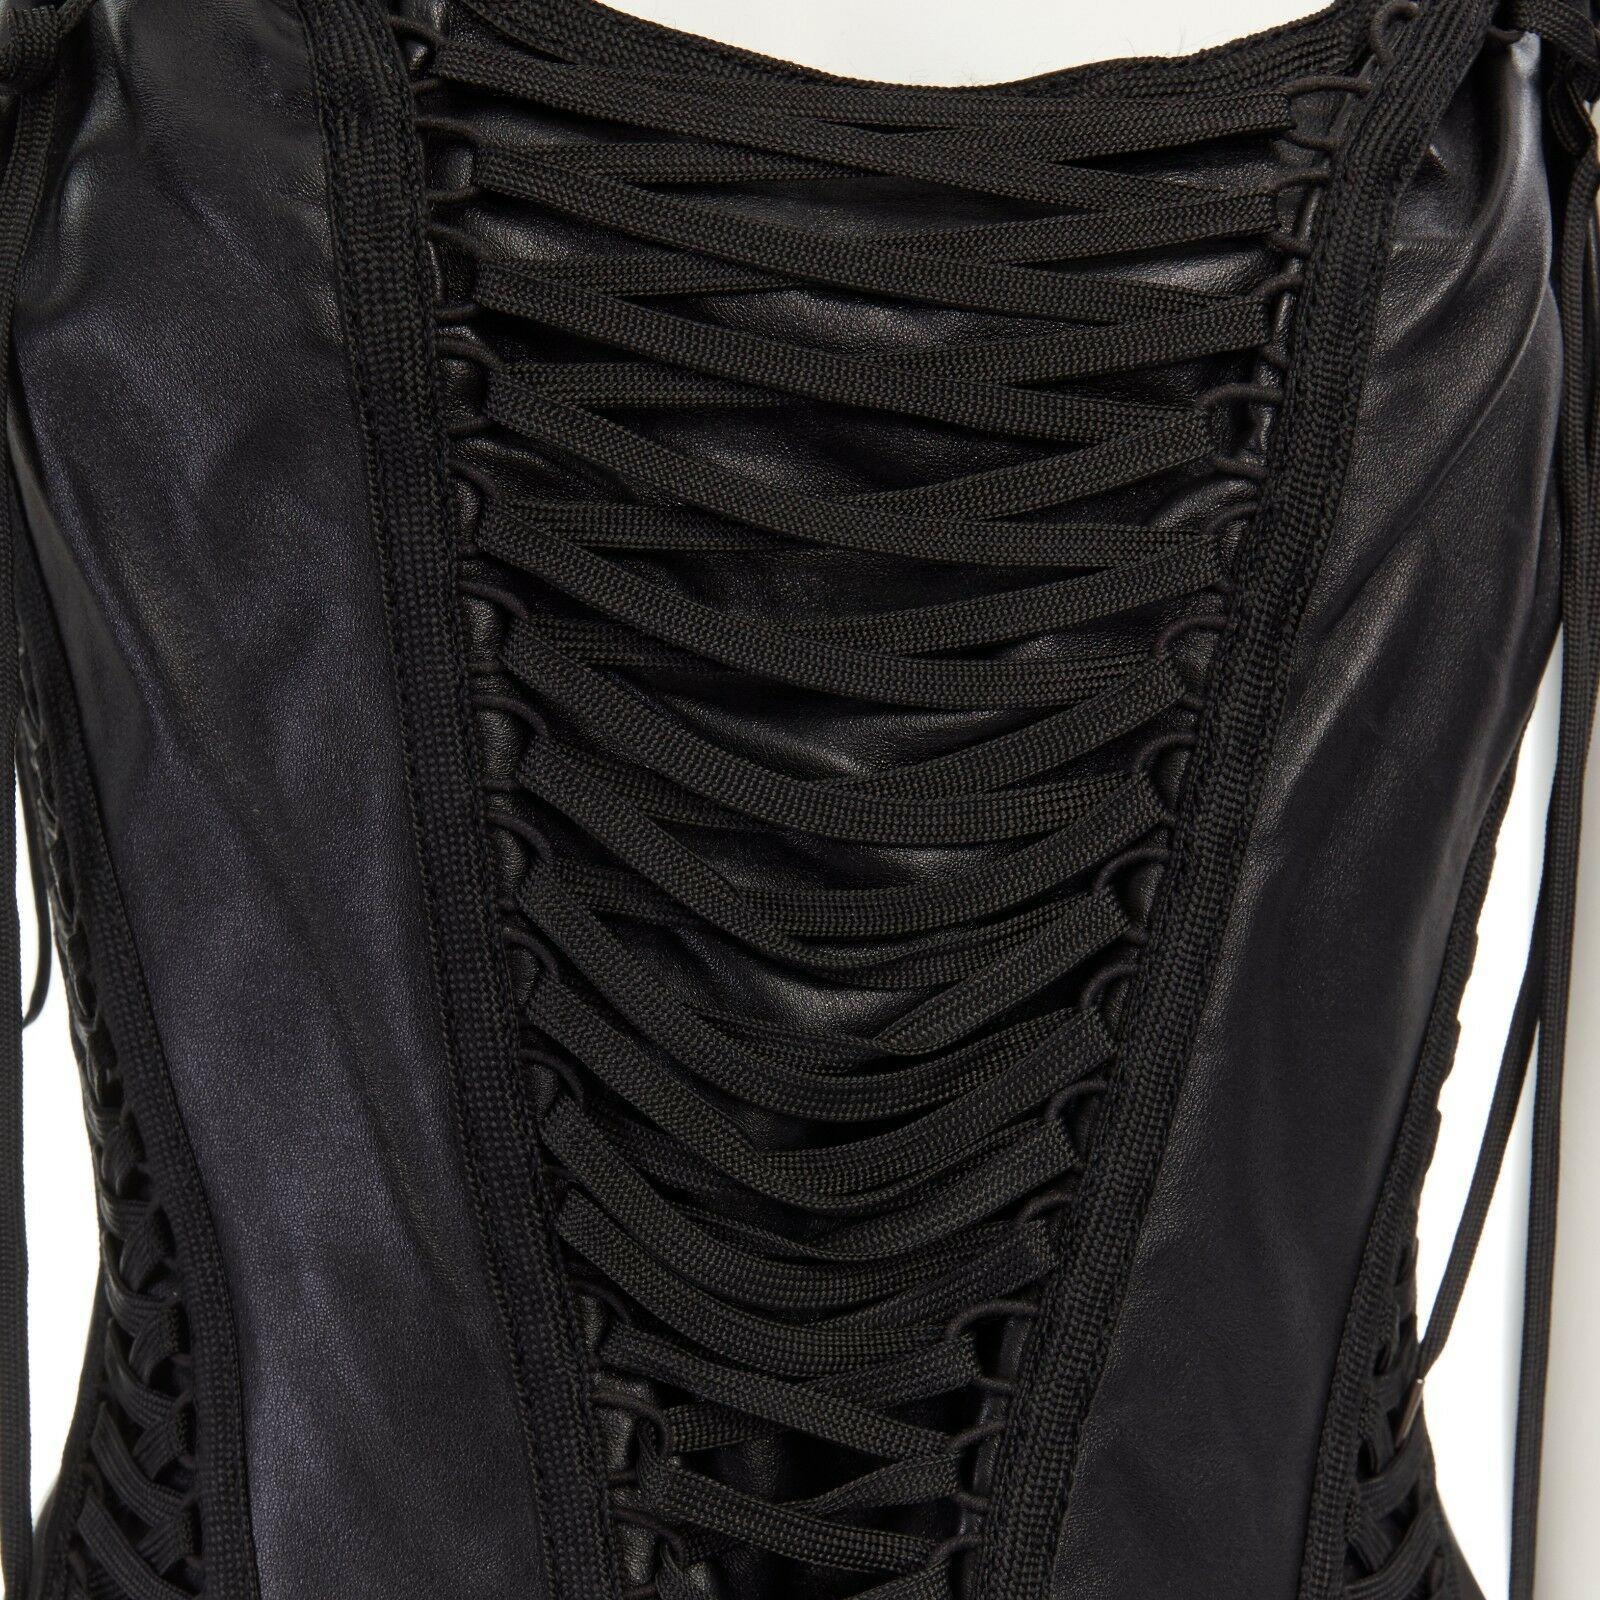 CHRISTIAN DIOR GALLIANO Vintage black leather laced corset vest top FR42 L
CHRISTIAN DIOR BY JOHN GALLIANO
Black leather upper. Corset-inspired. 
Lace up detail throughout. Scoop neck. Sleeveless. 
Side zip closure. Fully lined. 
Made in